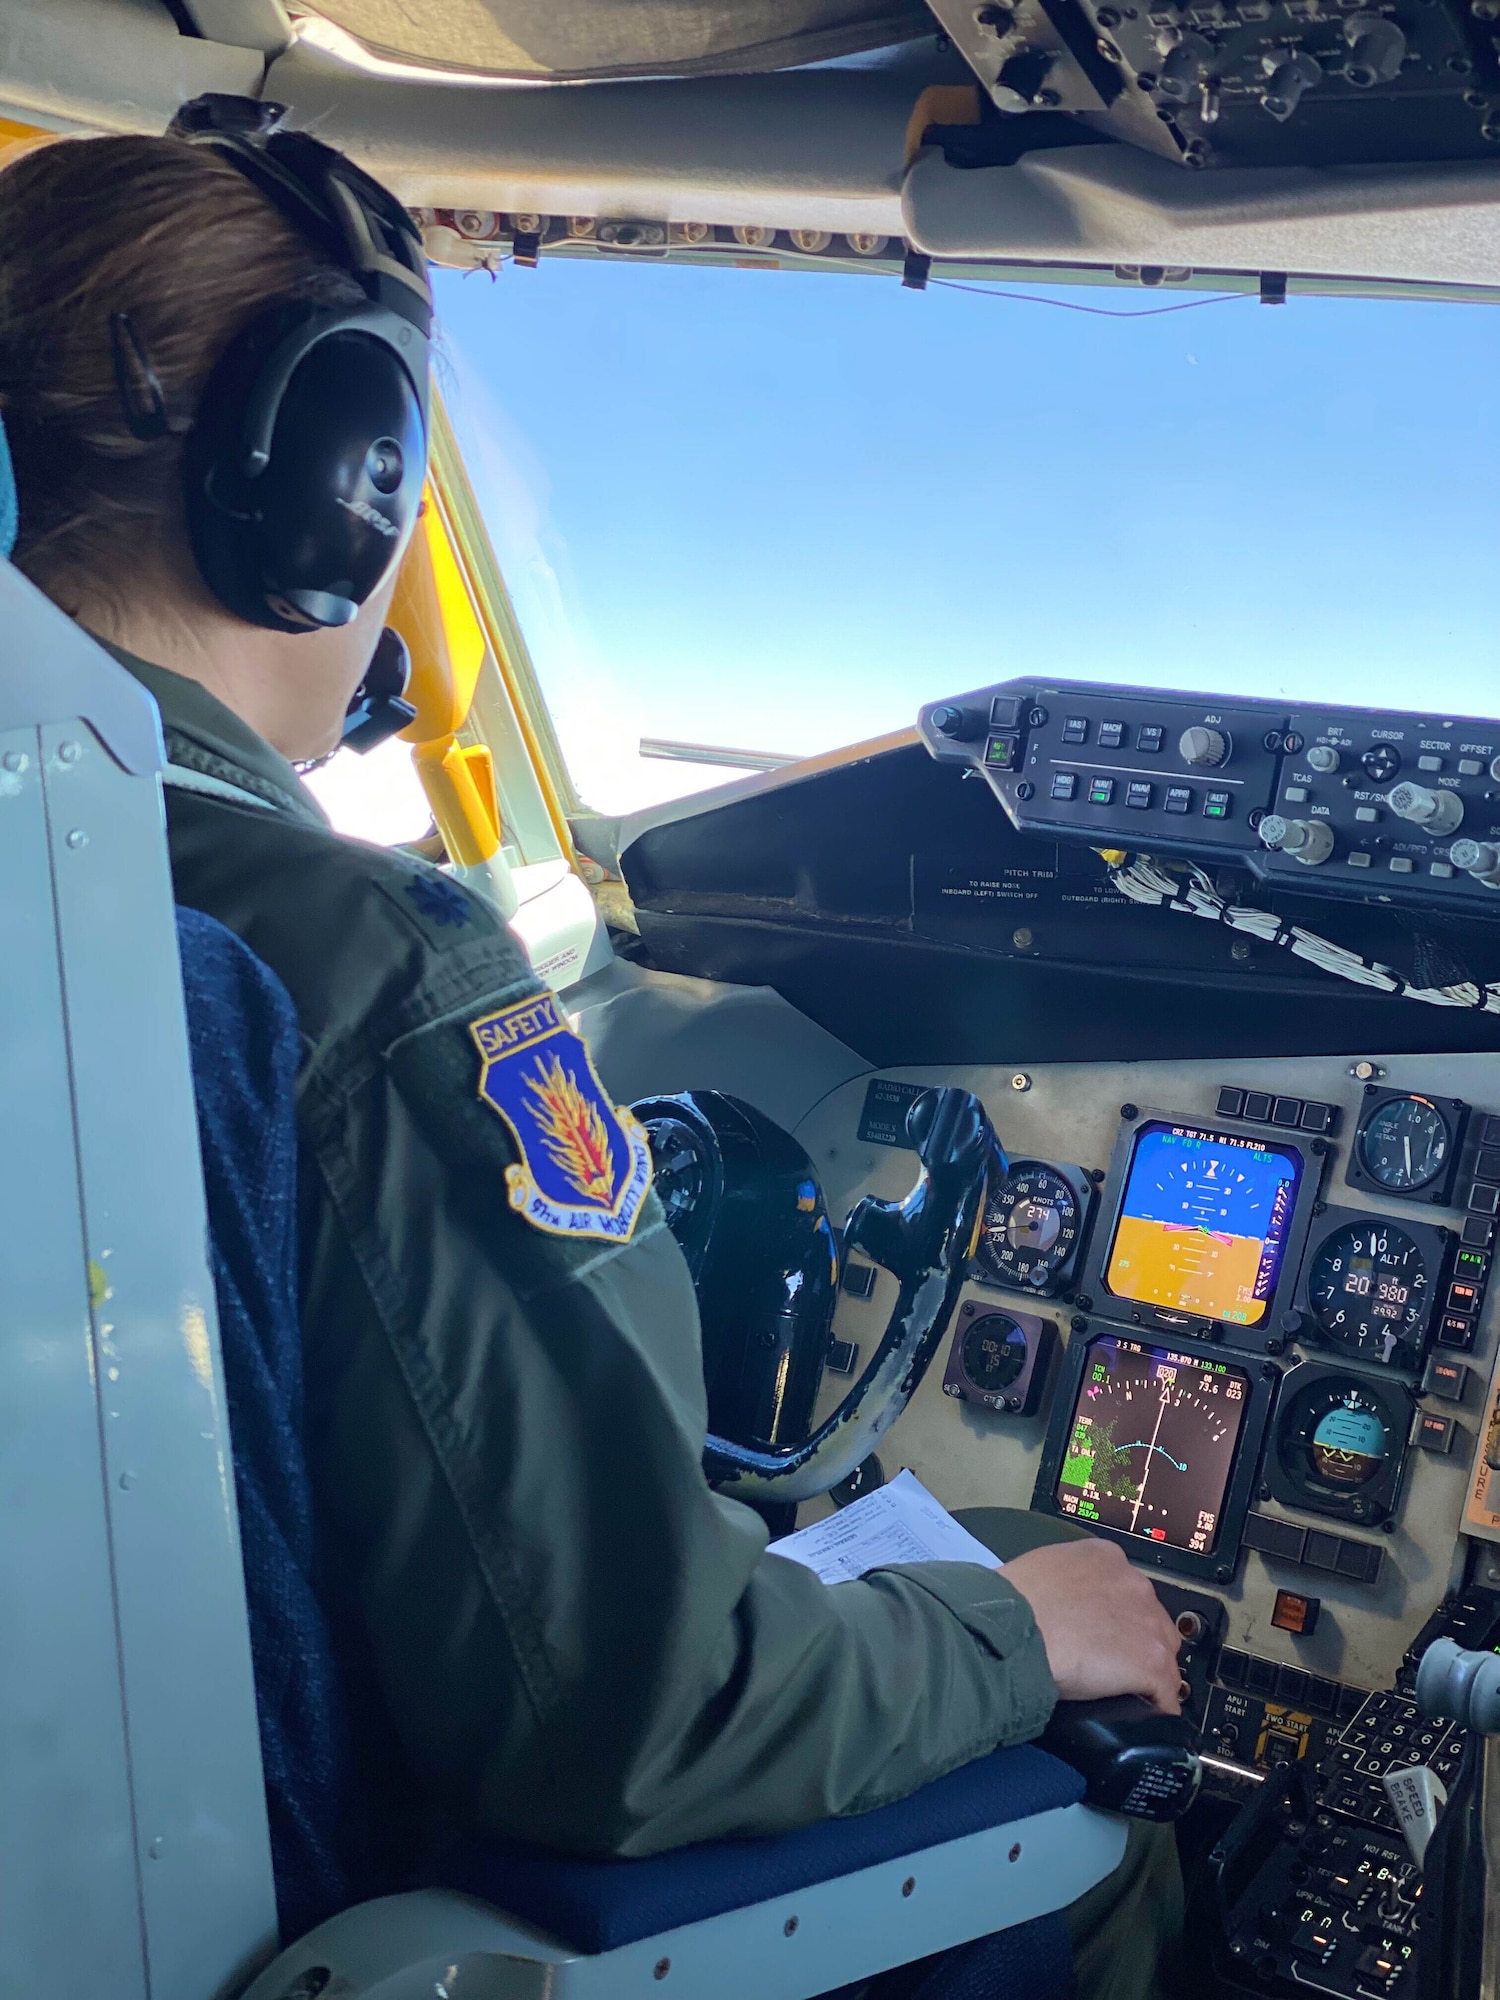 U.S. Air Force Lt. Col. Sarah Bulinski, 97th Air Mobility Wing chief of safety, flies a KC-135 Stratotanker, April 28, 2022. The KC-135’s all-female aircrew showcased the aircraft at the Dyess Air Force Base, Texas, Women’s Summit alongside aircraft from multiple other bases and units. (Courtesy photo)